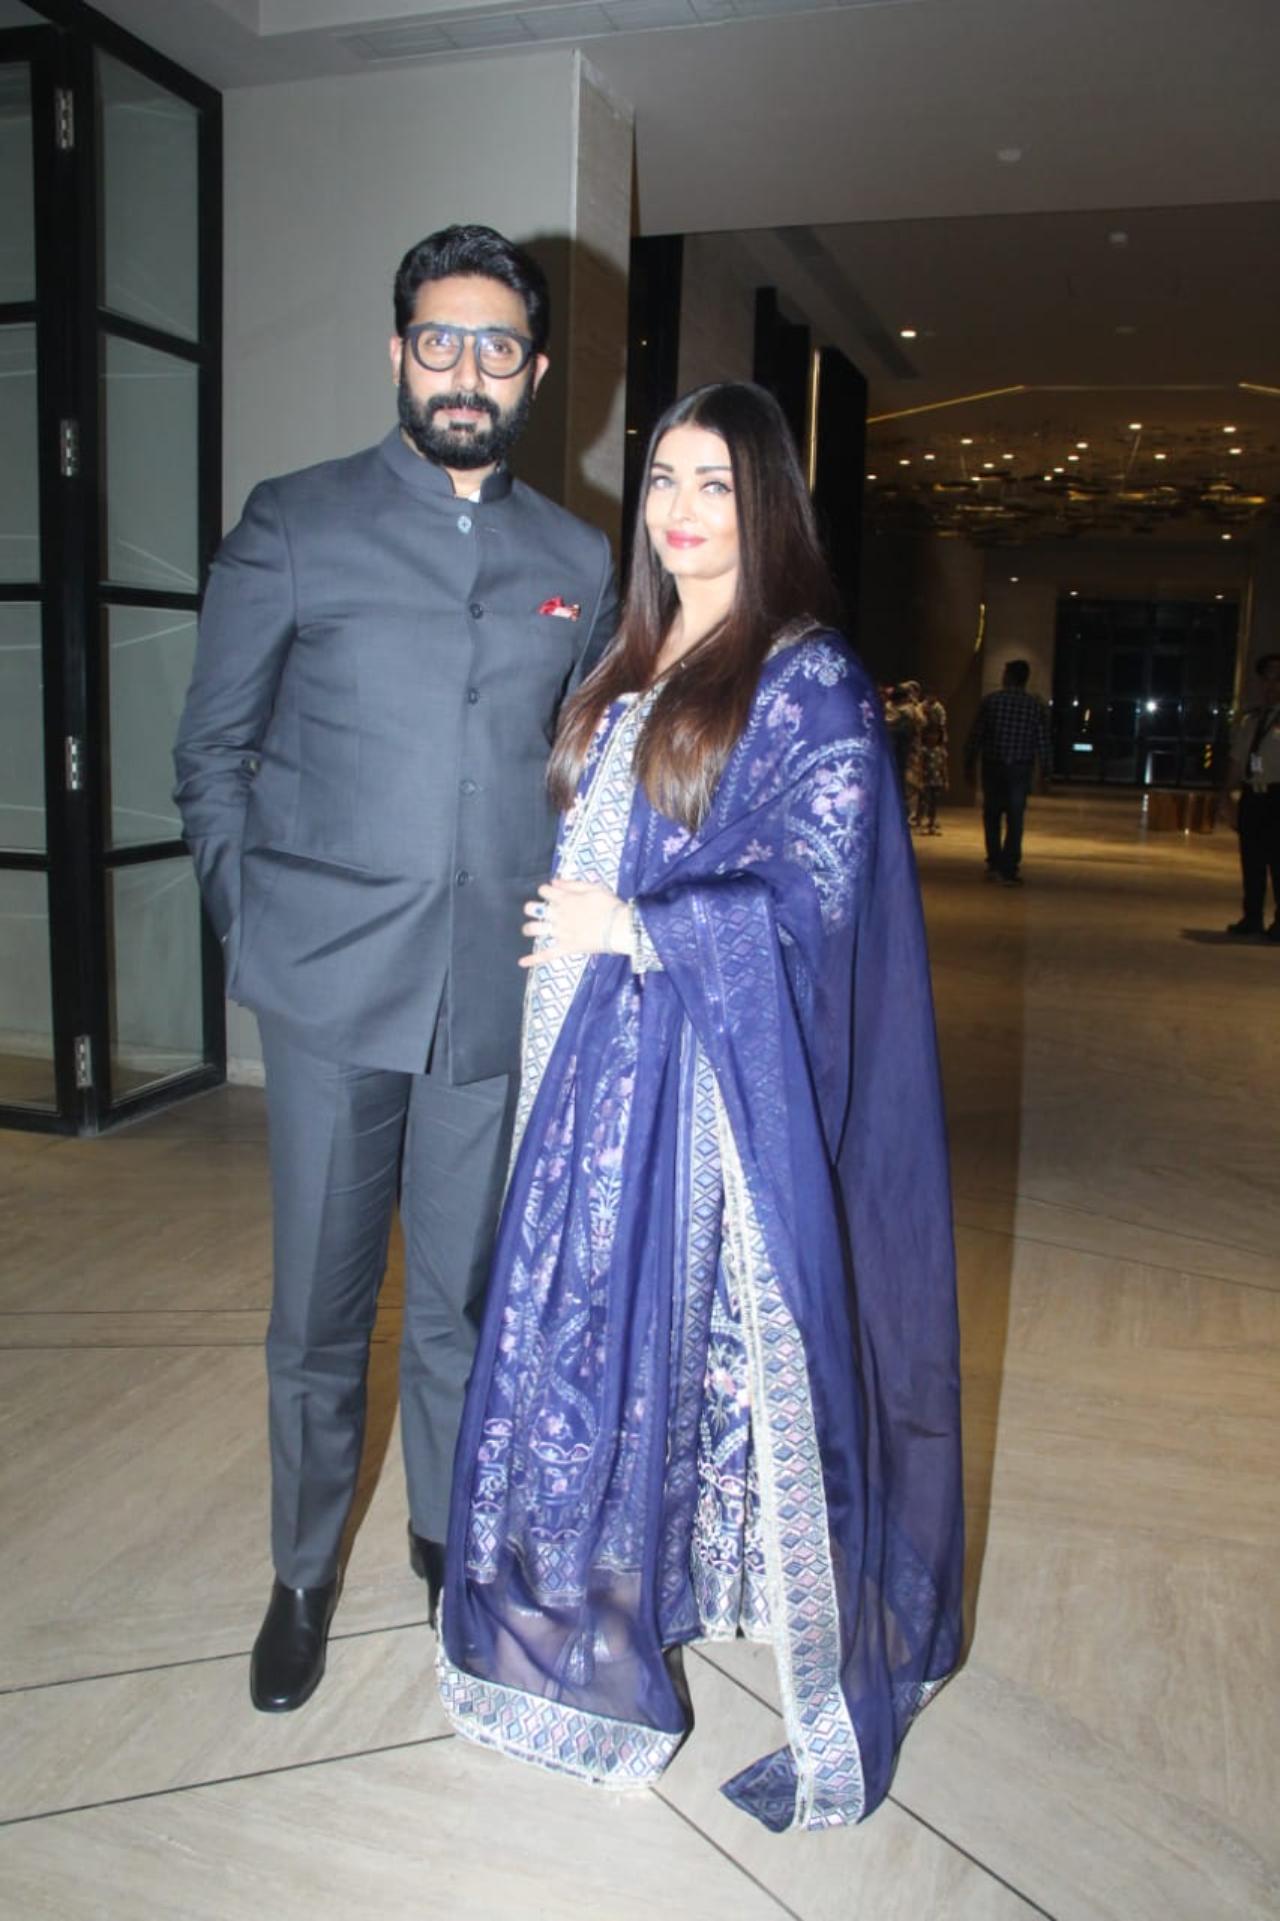 Aishwarya Rai and Abhishek Bachchan looked stunning as they arrived hand-in-hand for the party